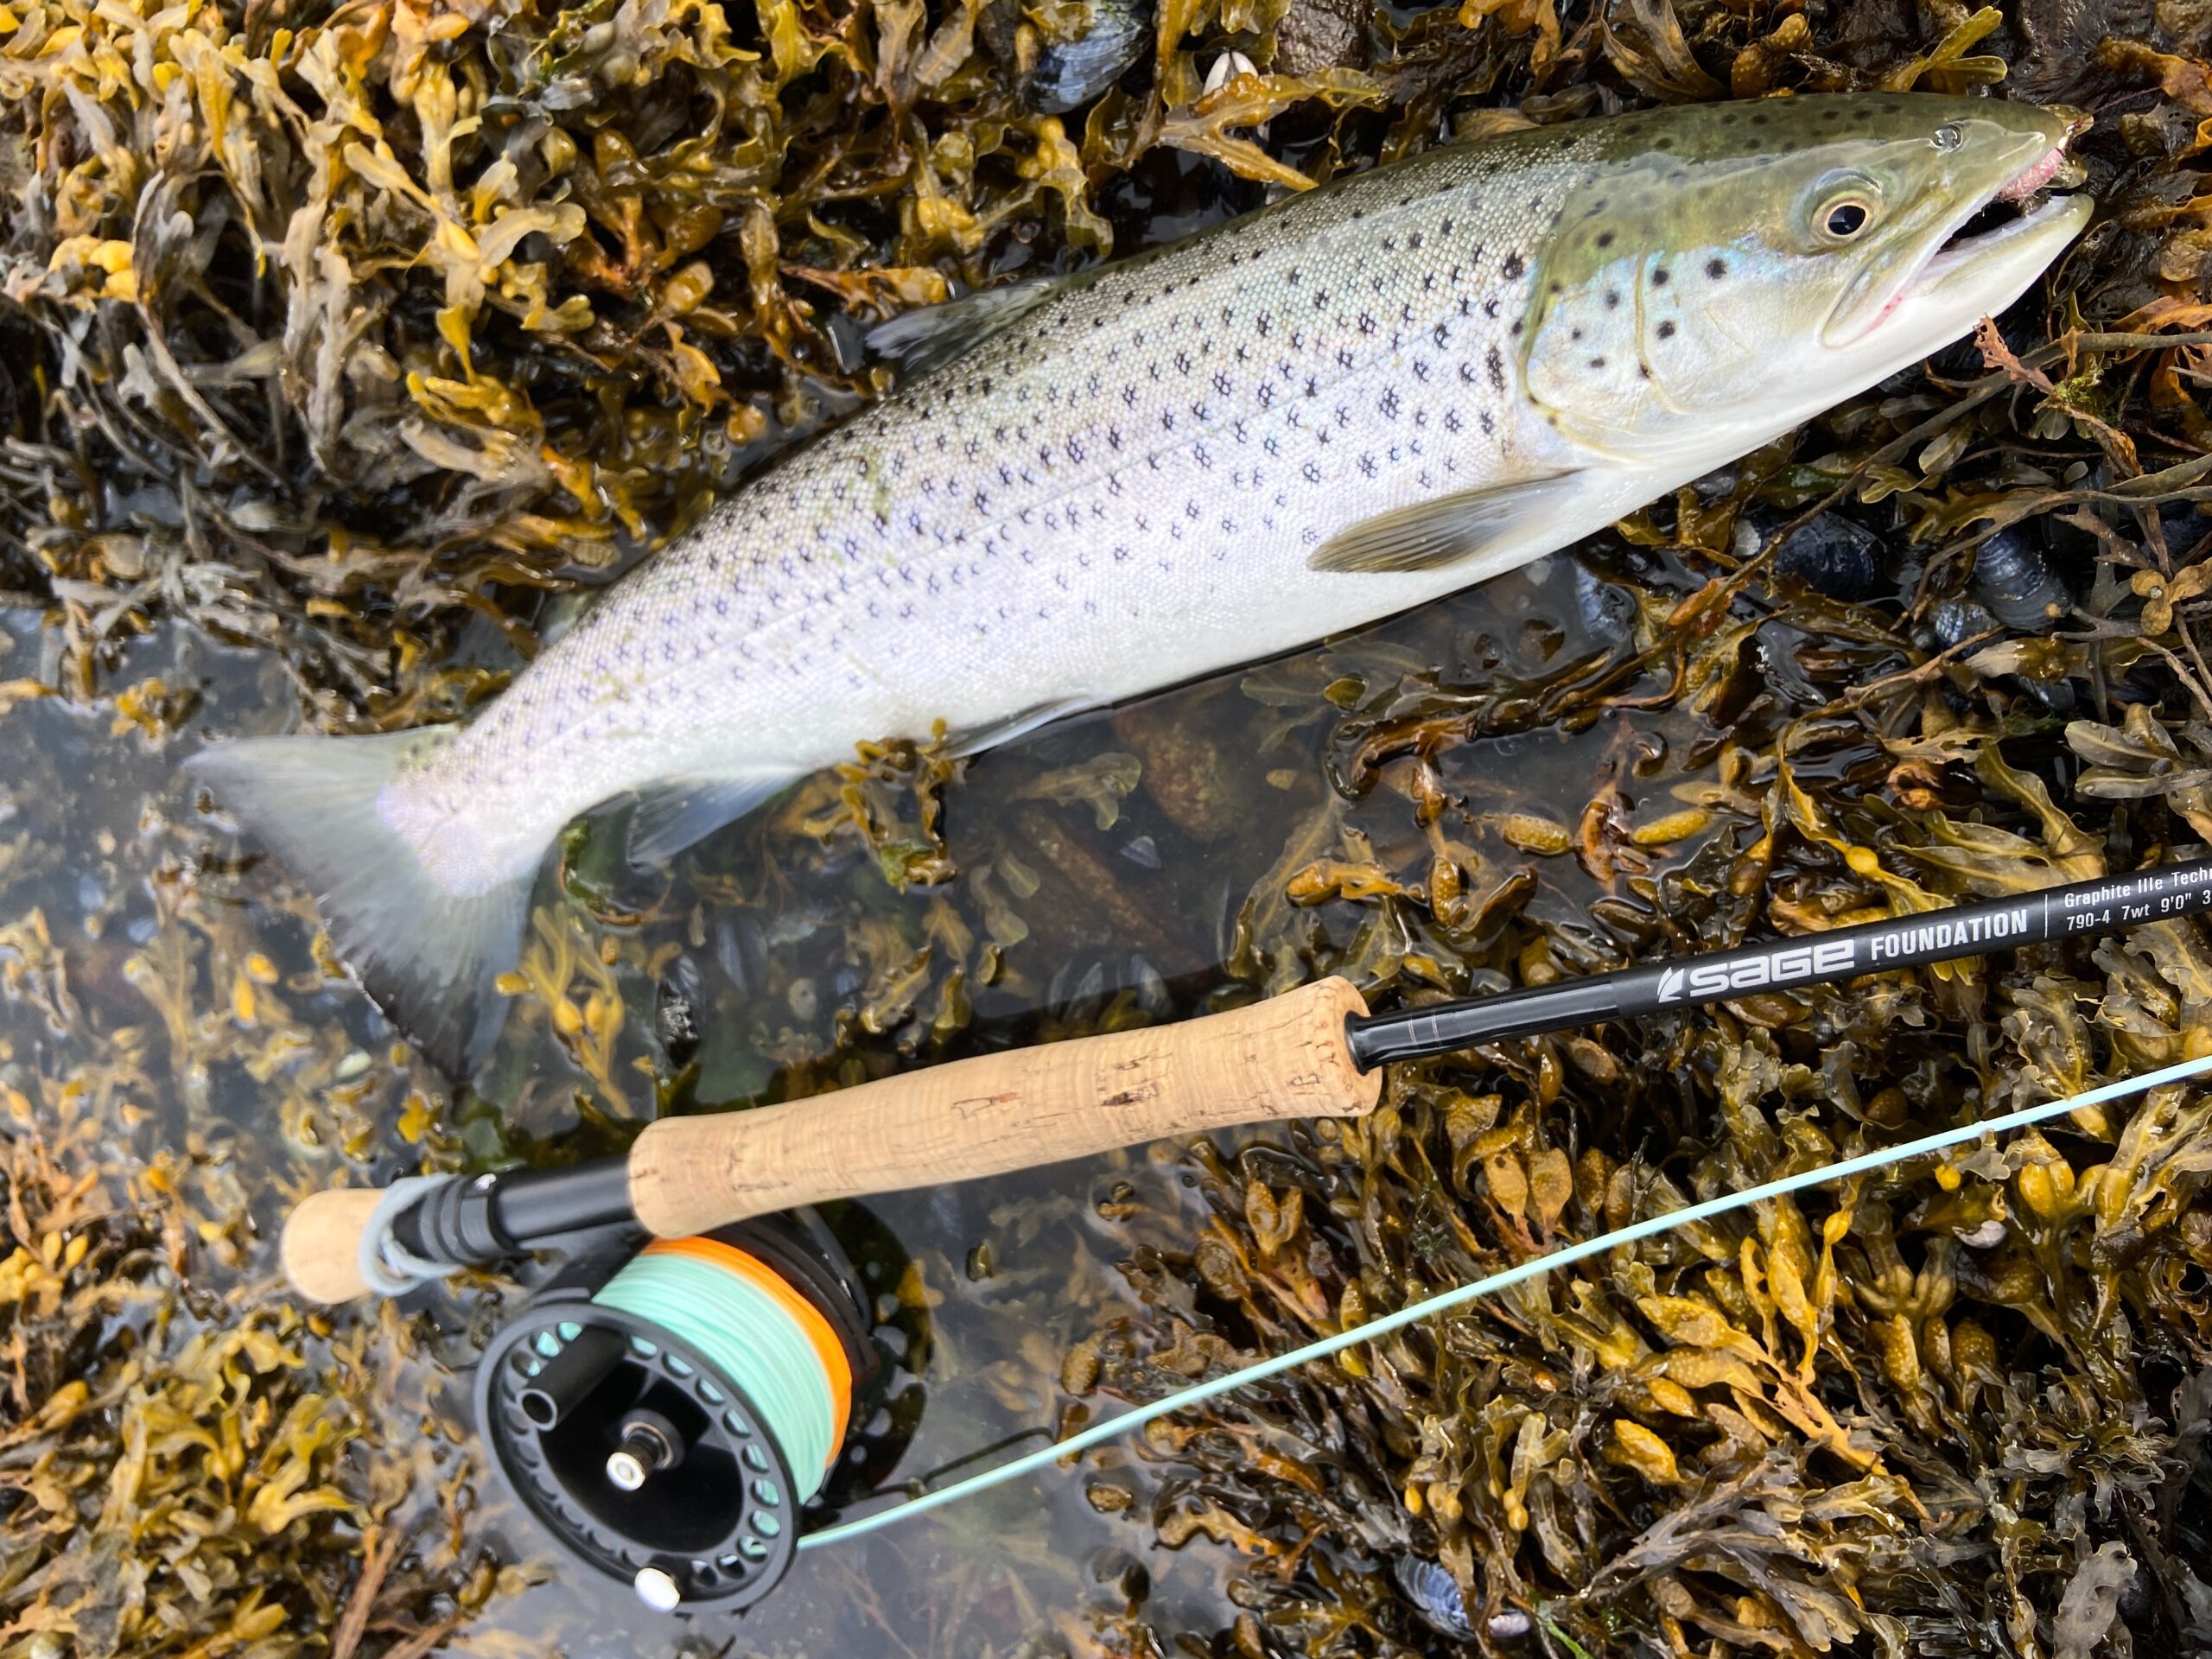 Sea trout from the coast line